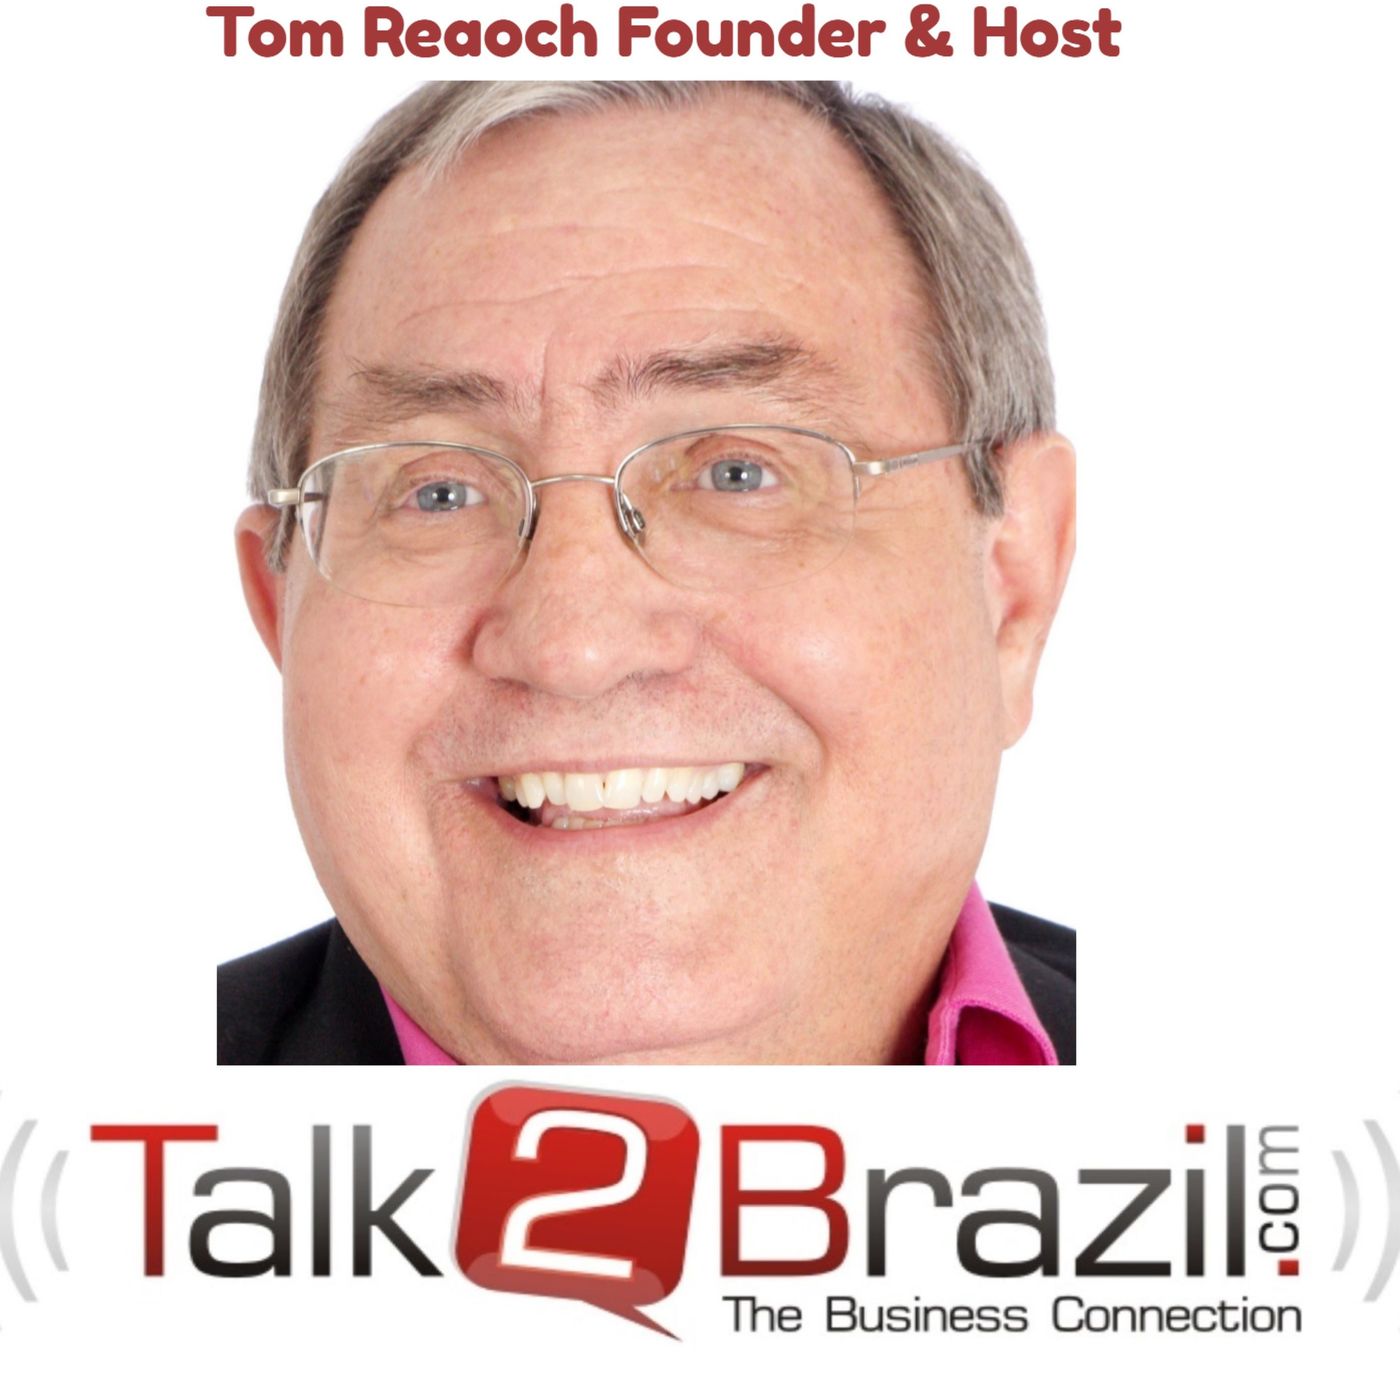 Chat 5, India, Brazil, Ajay and Tom, Business Opportunities